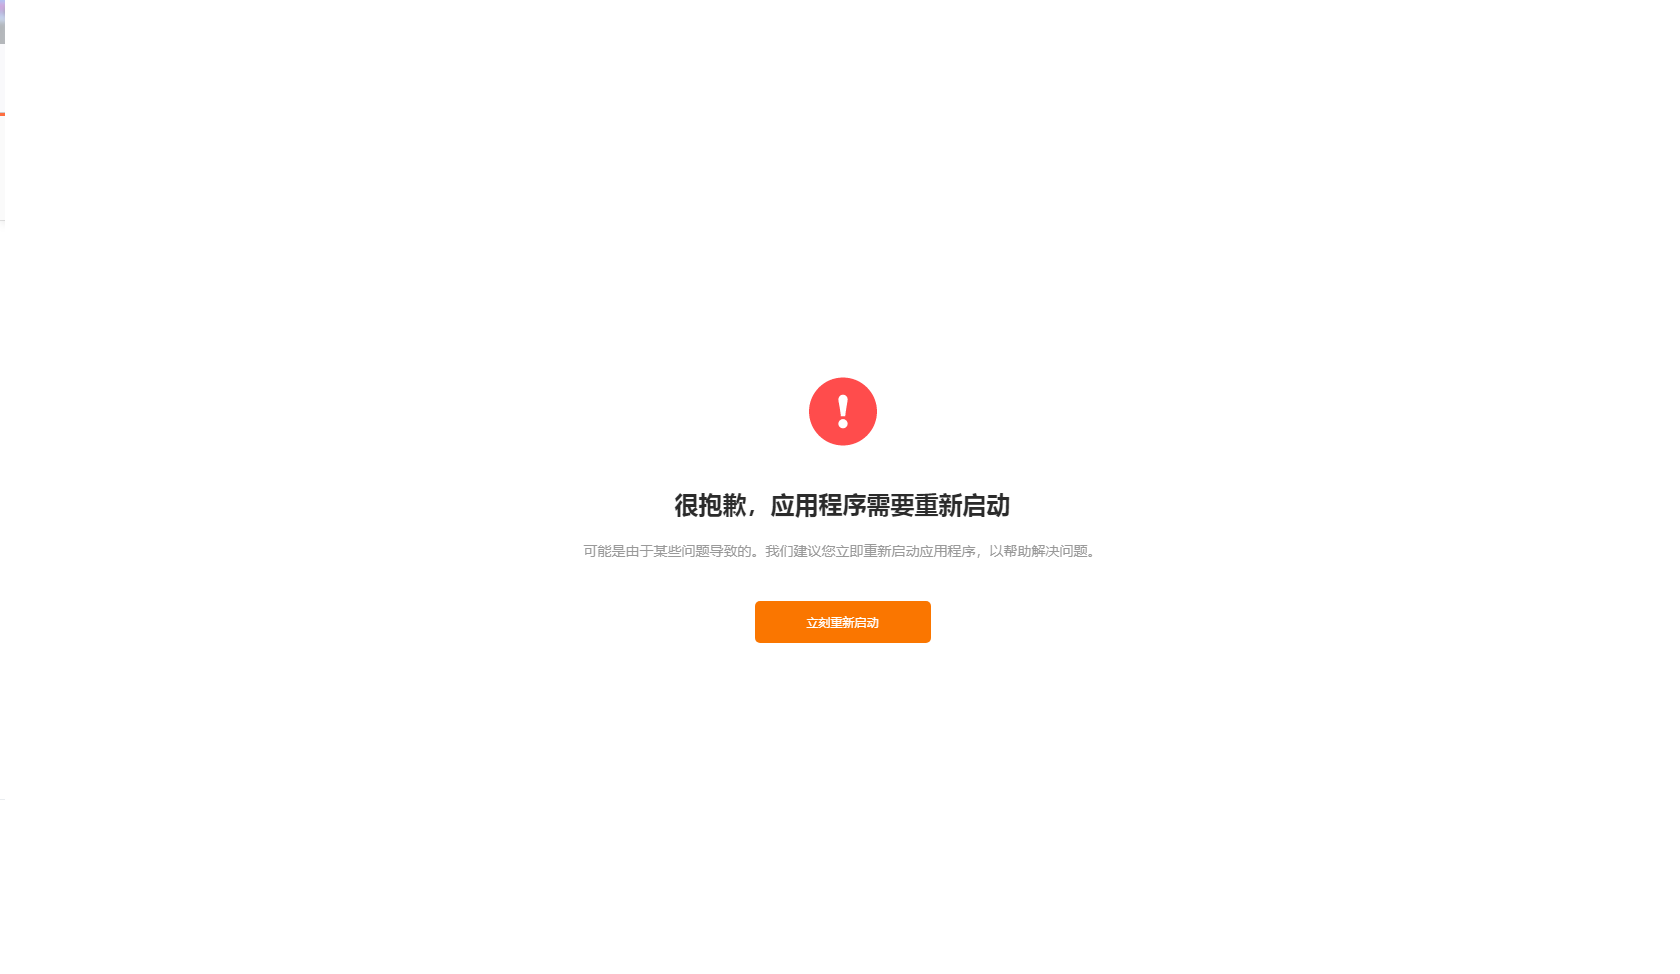 apipost为什么打不开